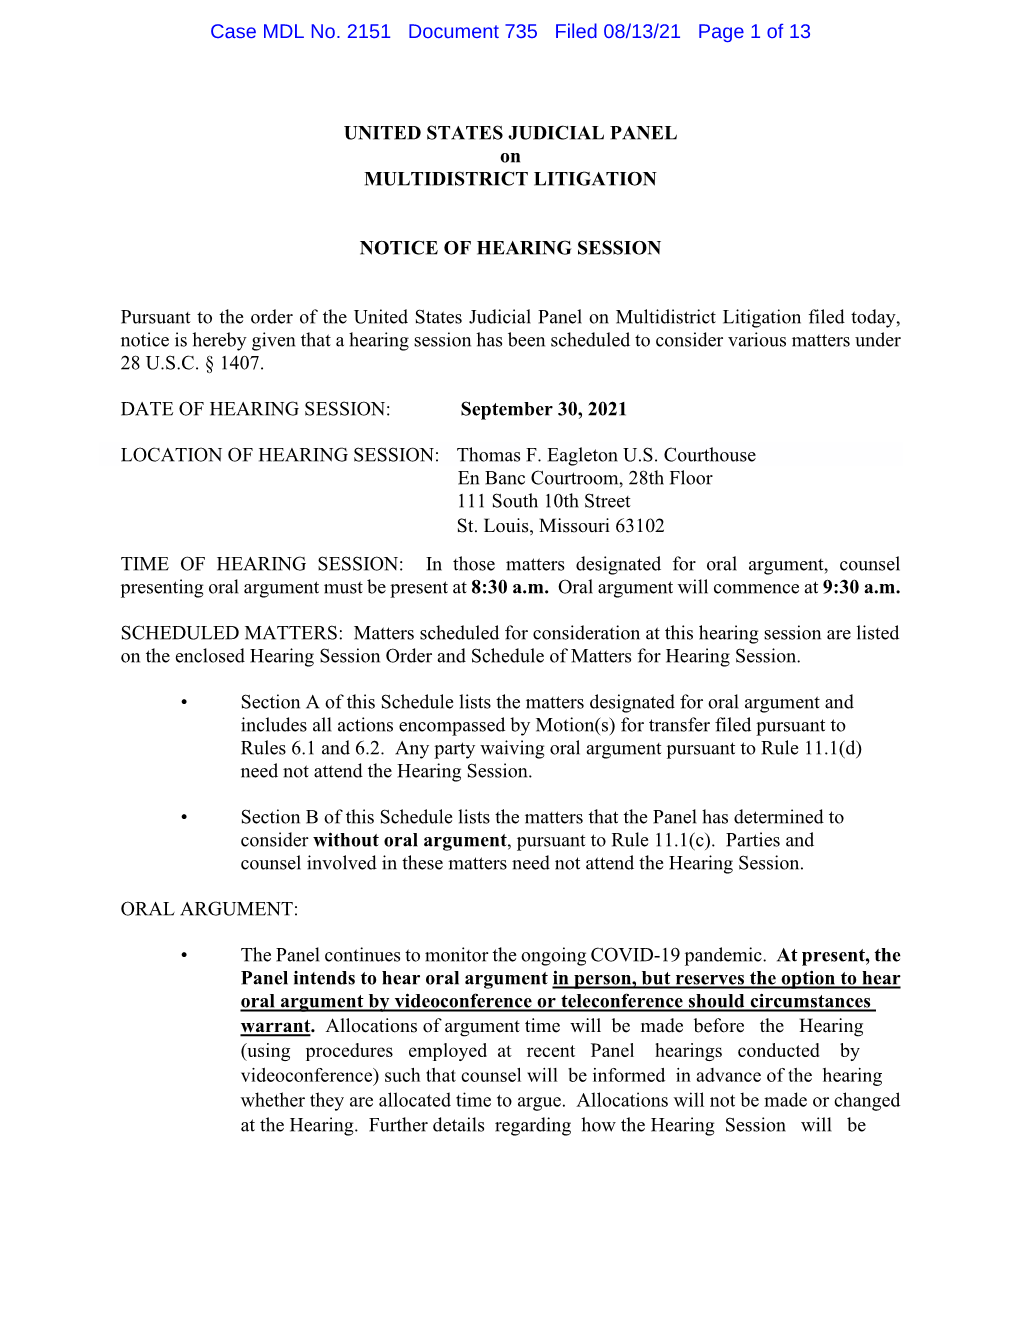 Notice of Hearing Session